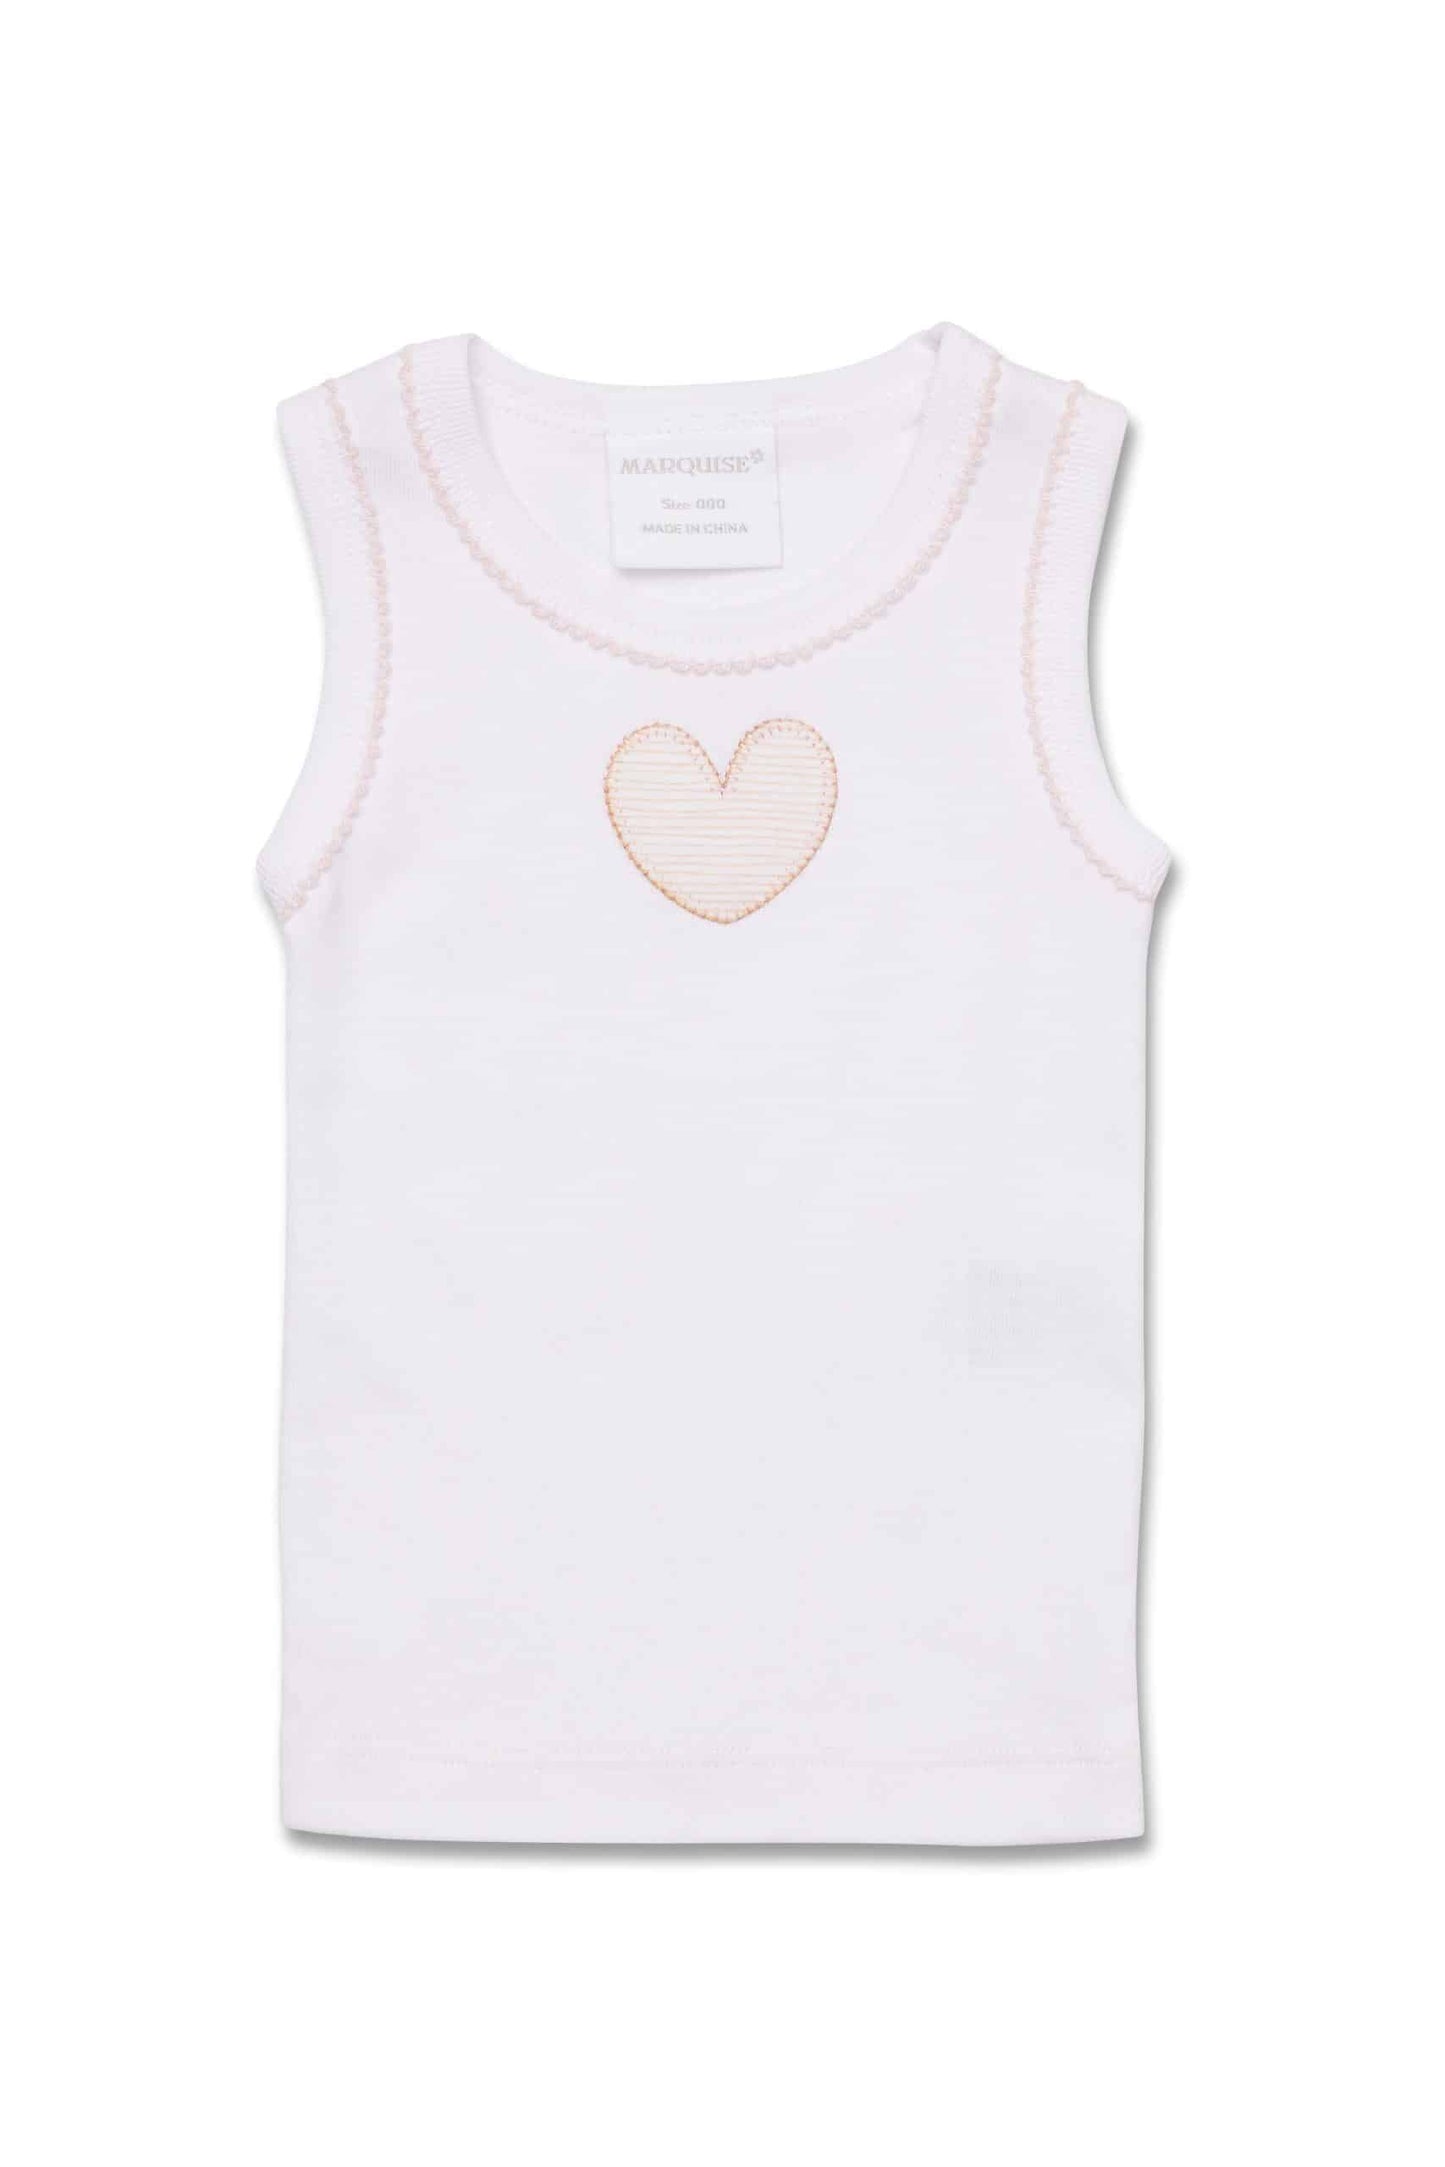 Marquise Heart Singlet and Frilled Bloomer Set - Applique Heart